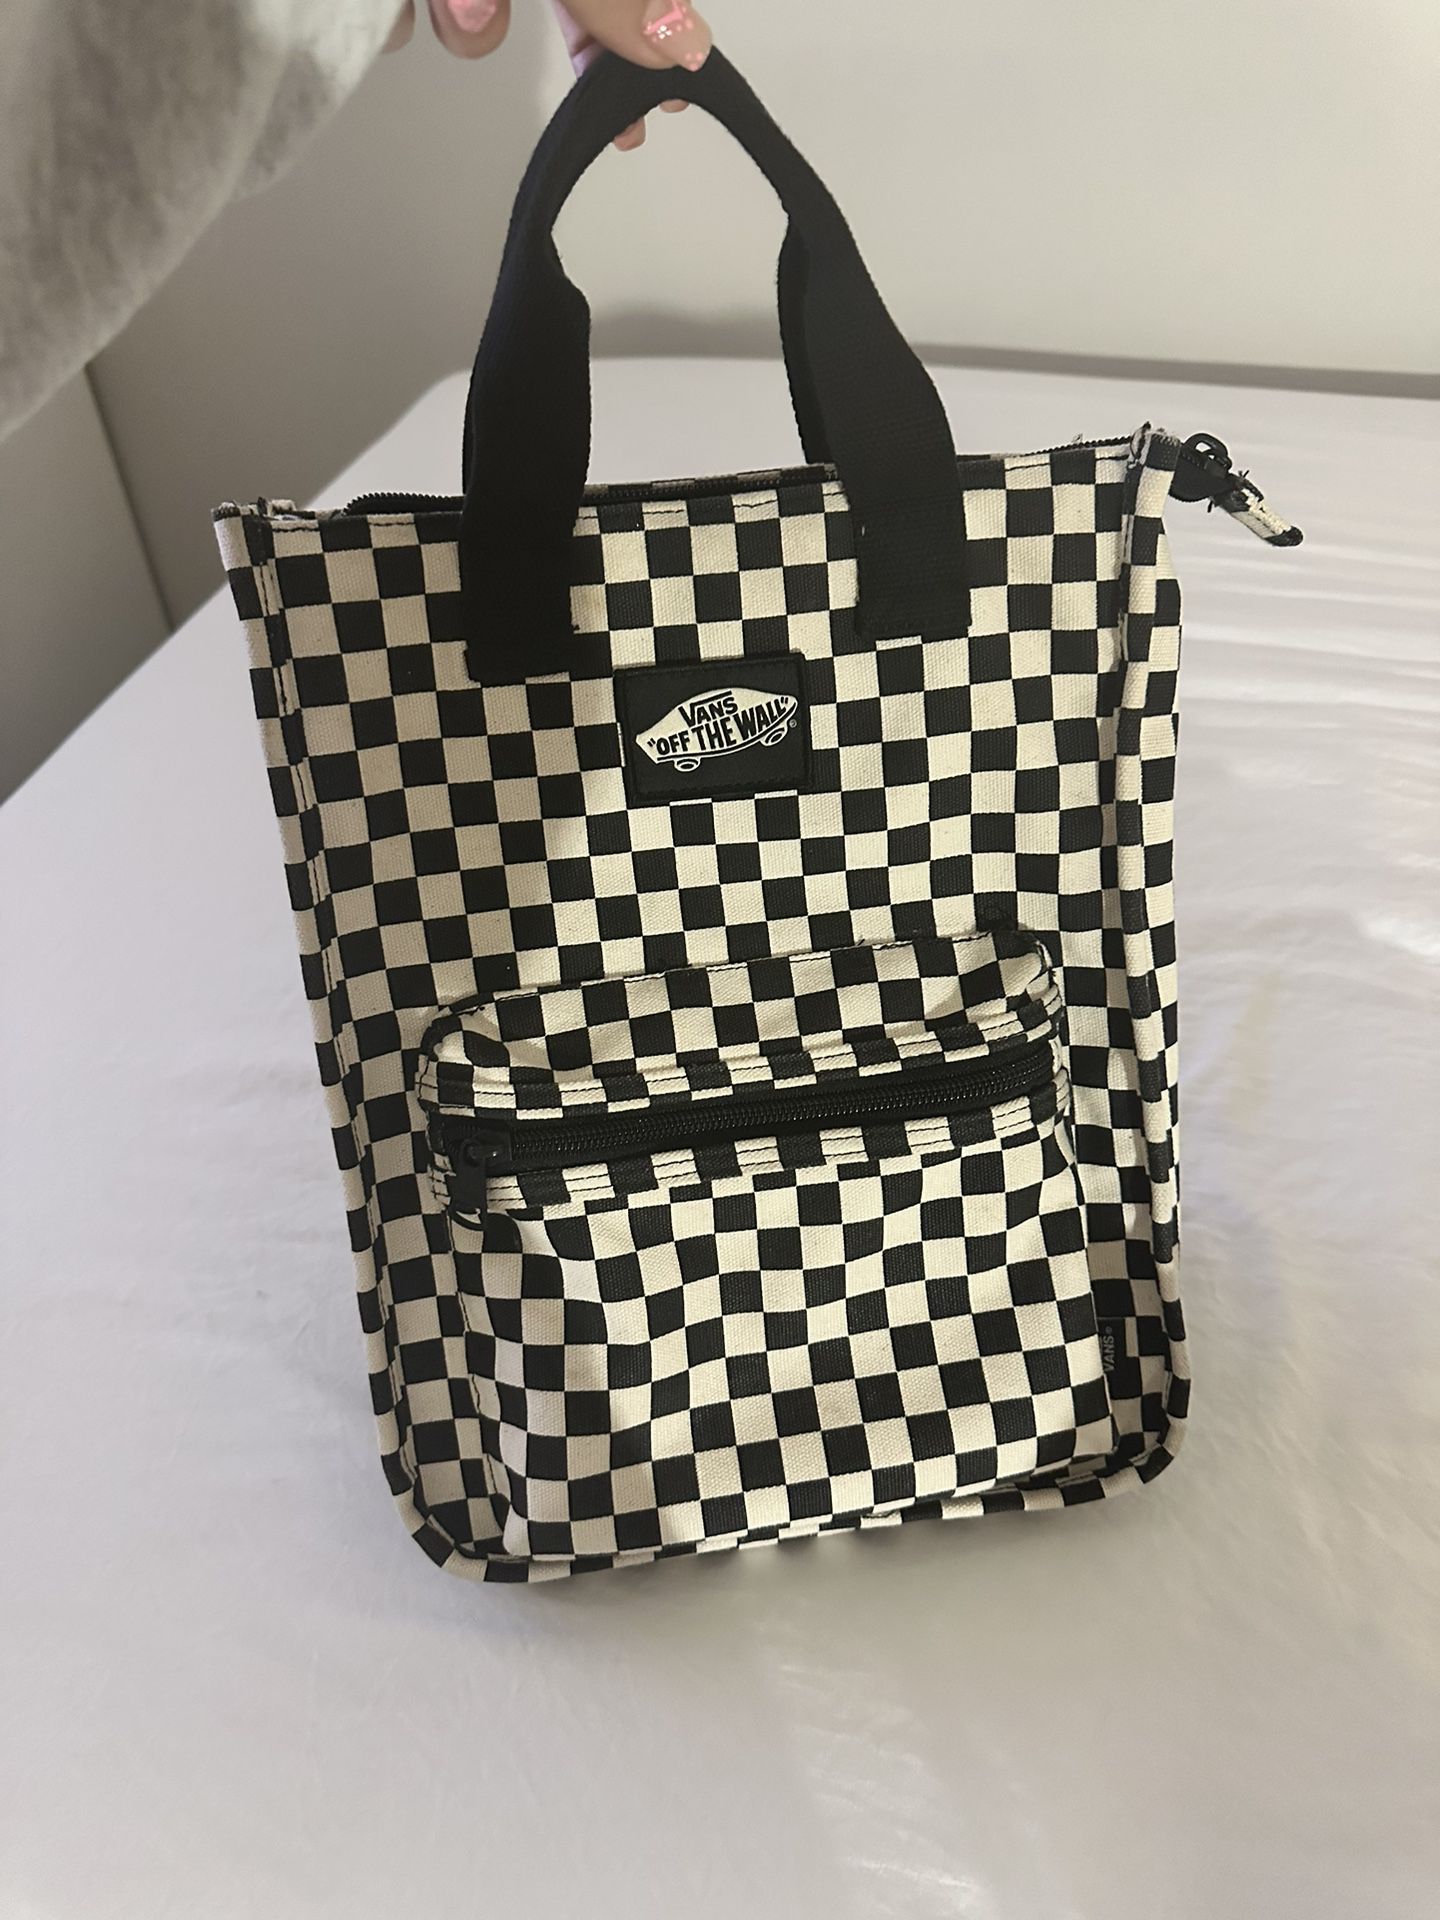 Vans Mini Tote Bag for Sale in - OfferUp